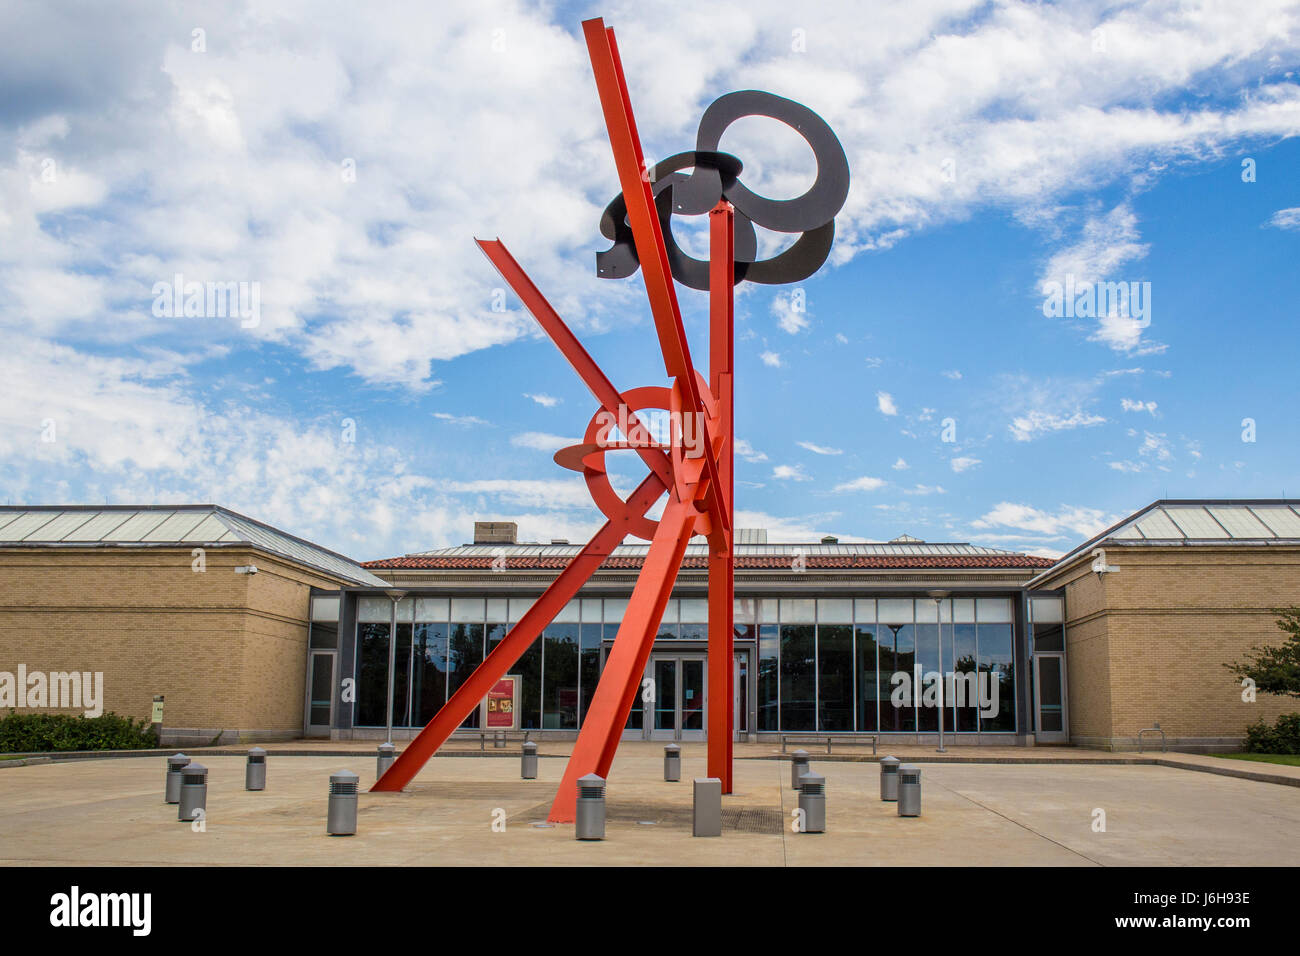 Sculpture at the Currier Museum in Manchester, New Hampshire Stock Photo